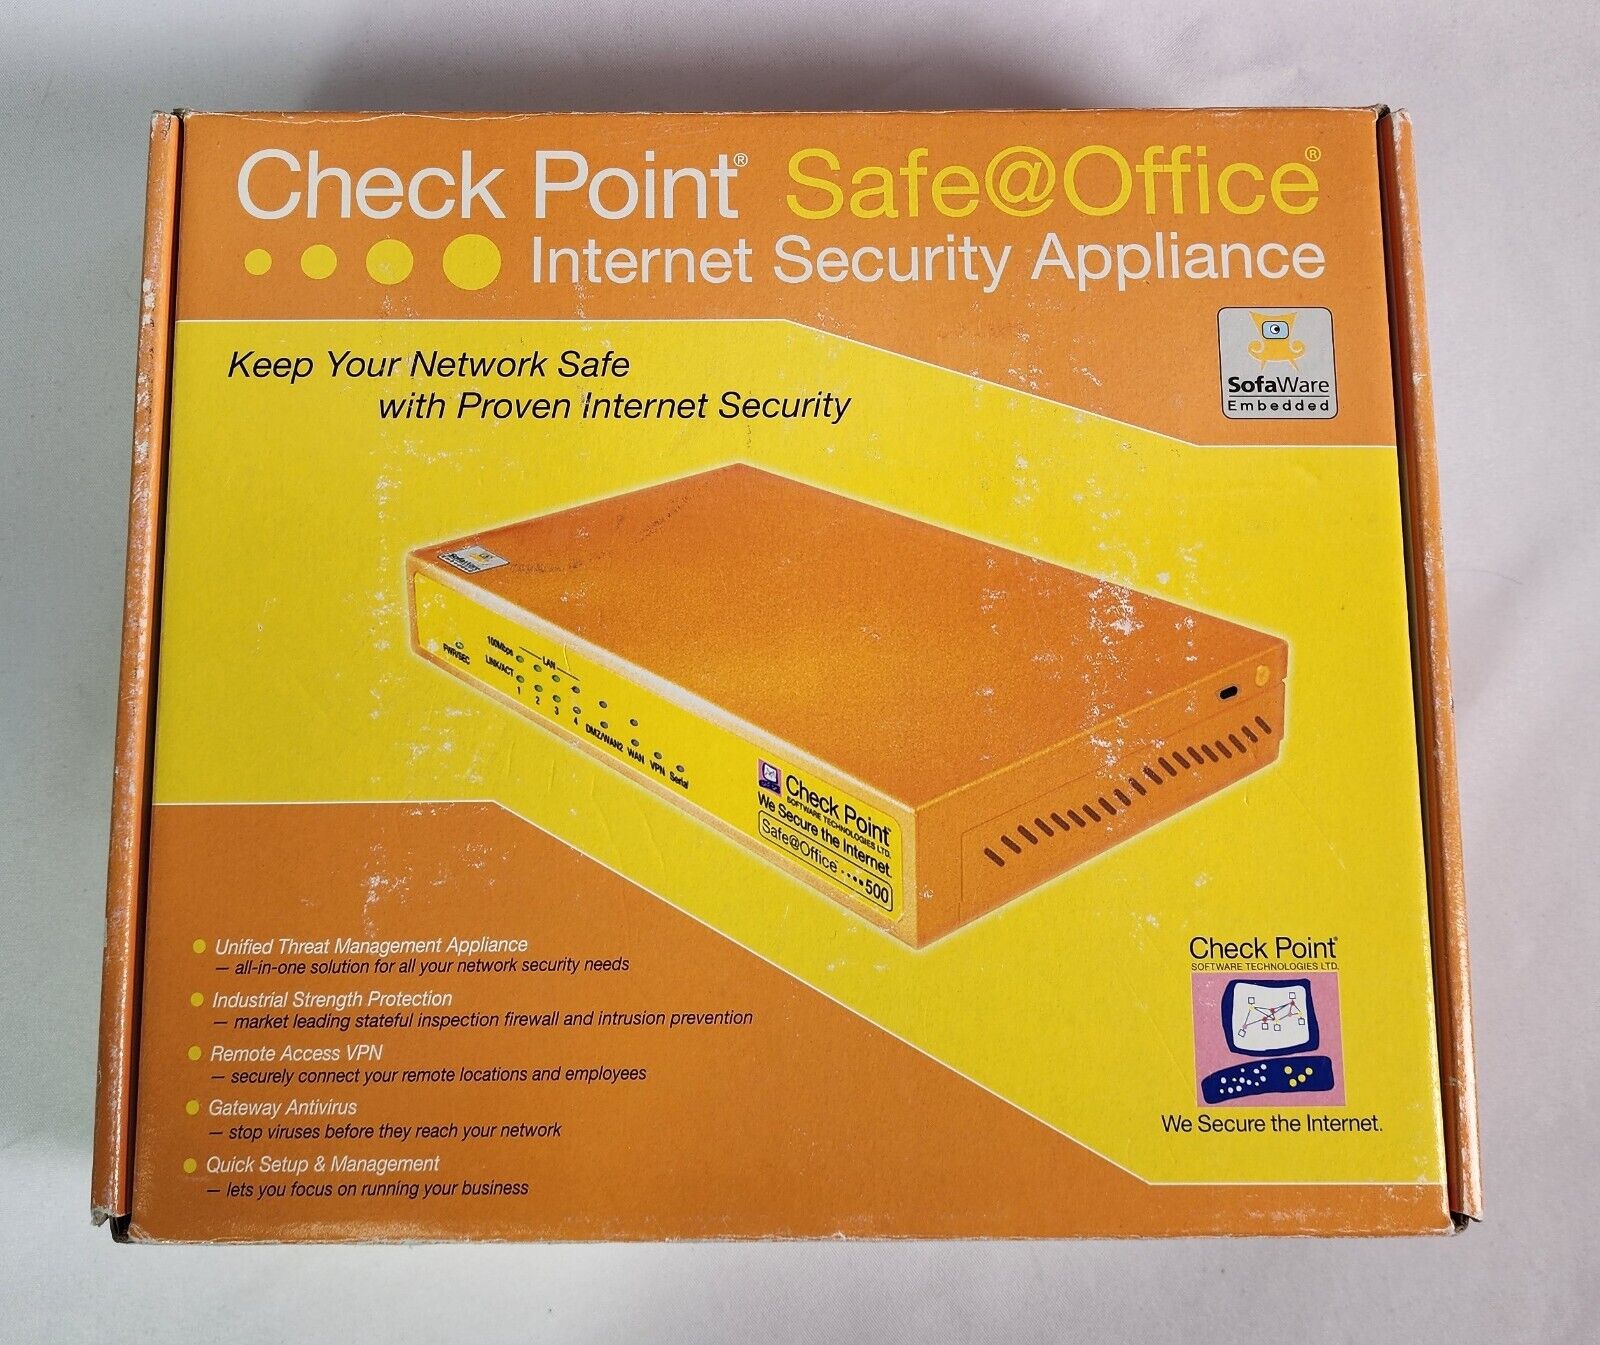 Check Point SBX-166LHGE-5 Safe@Office 500 Internet Security Appliance Firewall